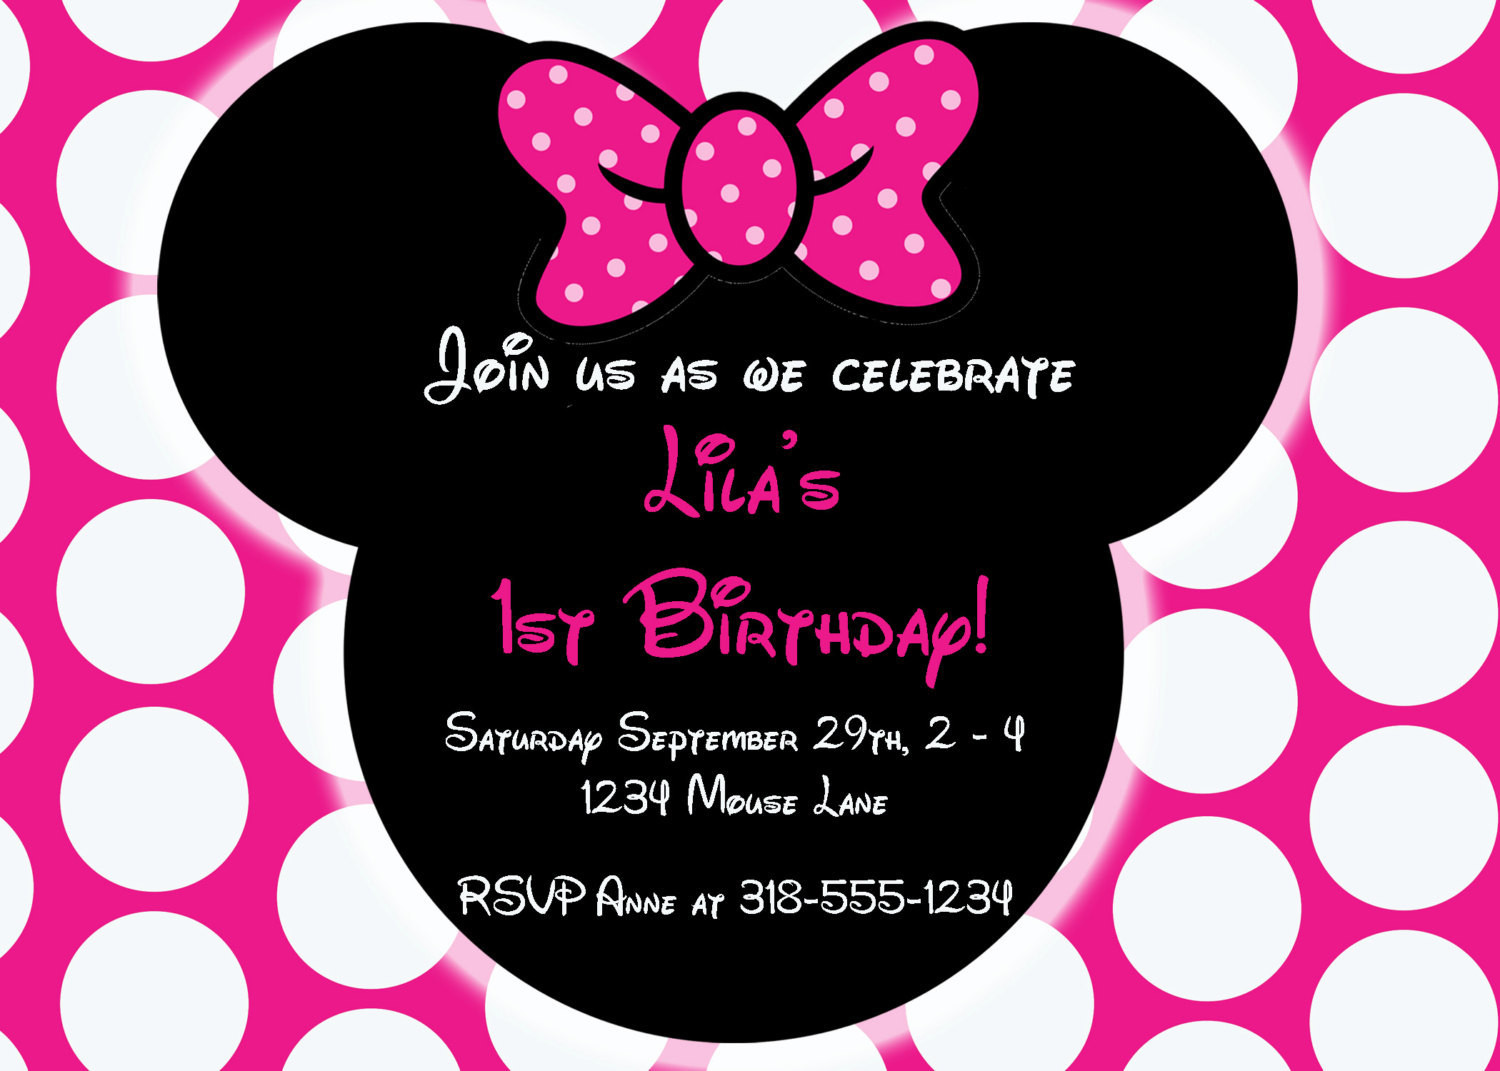 Printable Minnie Mouse Birthday Invitations
 Minnie Mouse Inspired Birthday Invitation PRINTABLE Mouse